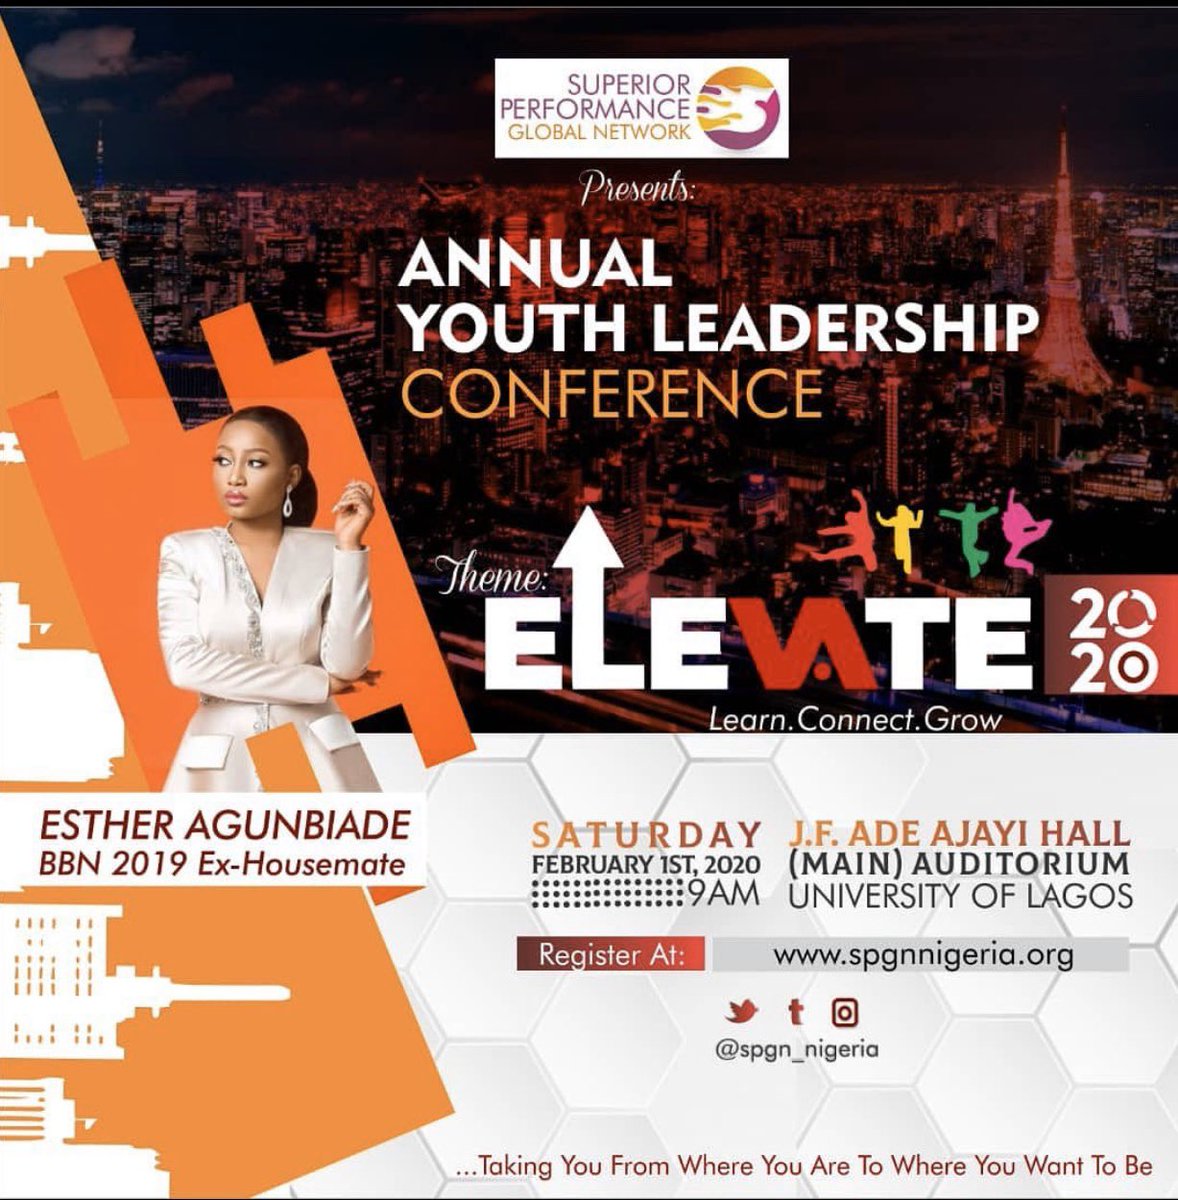 Hi Guys, 
Super Elated to be invited as a GUEST SPEAKER  by  the Superior Performance Global network to its  Annual Youth Leadership Conference 'Turning Point 3.0' @spgn_nigeria 

See flyer below on how to register to attend.
Can't wait to see you all,
Lets Talk Leadership!